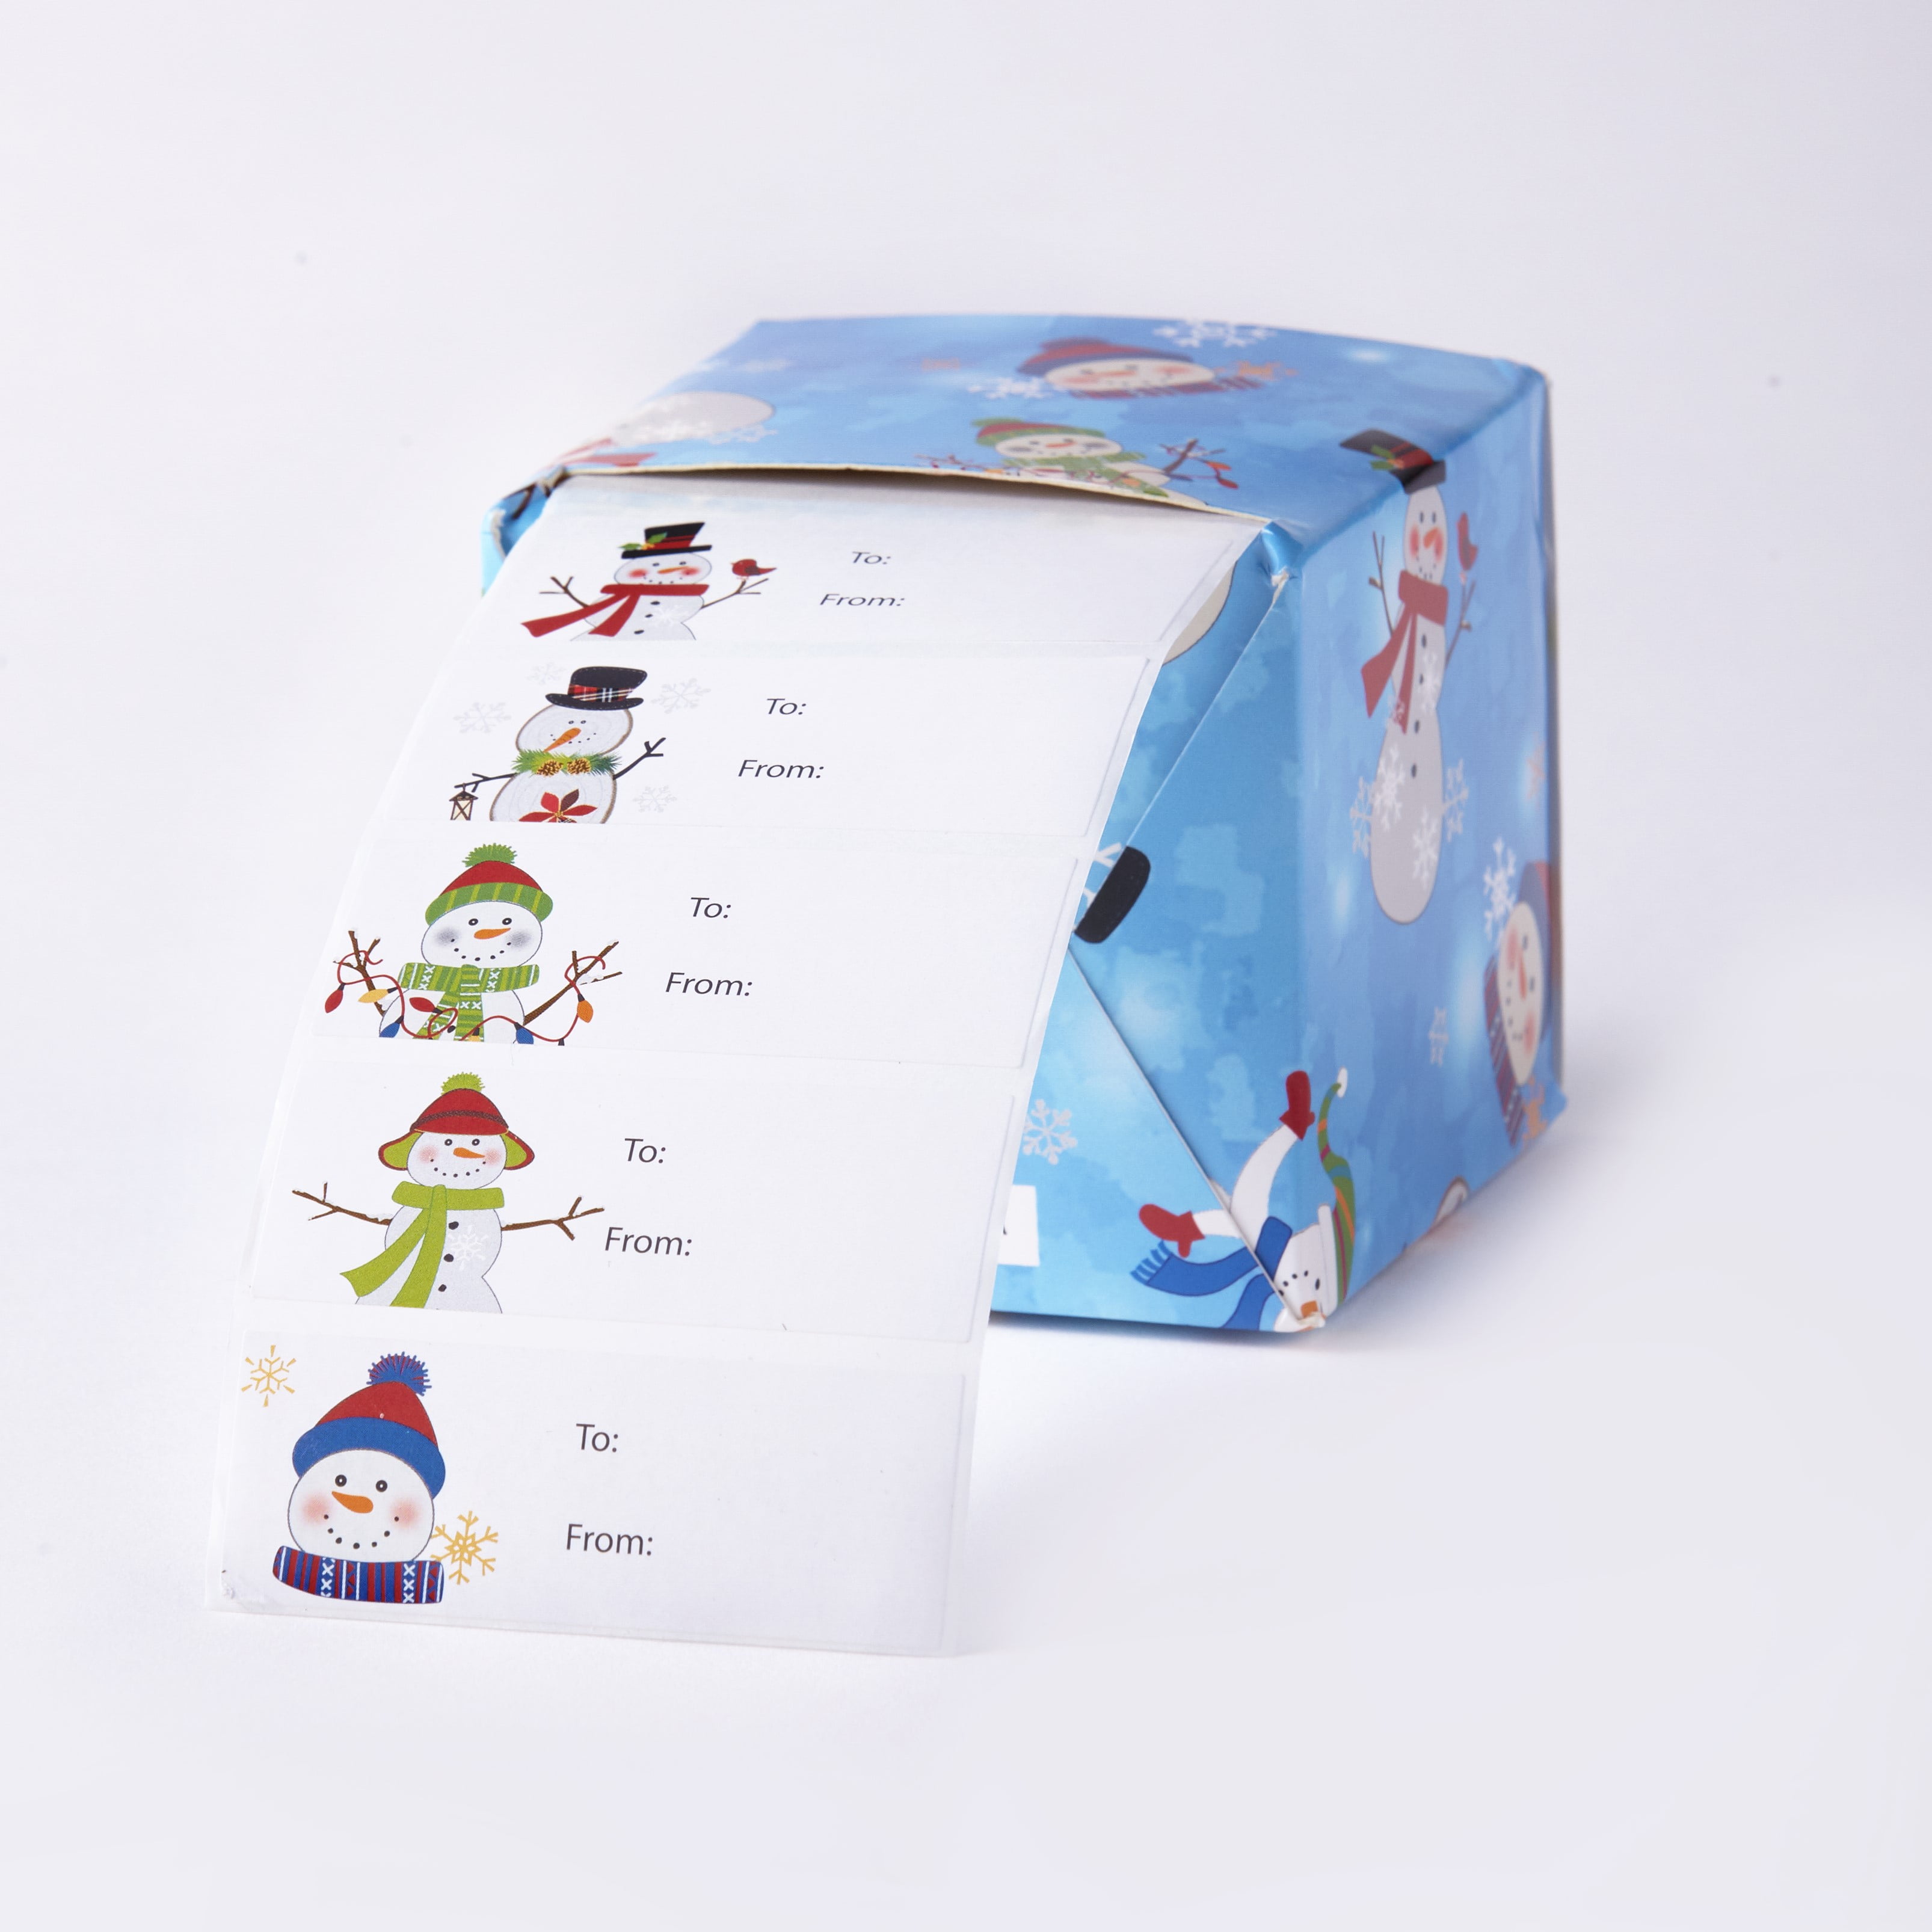 New 24xChristmas Handmade Gift Tags Present Gift Wrap Self-adhesive Sticky Label